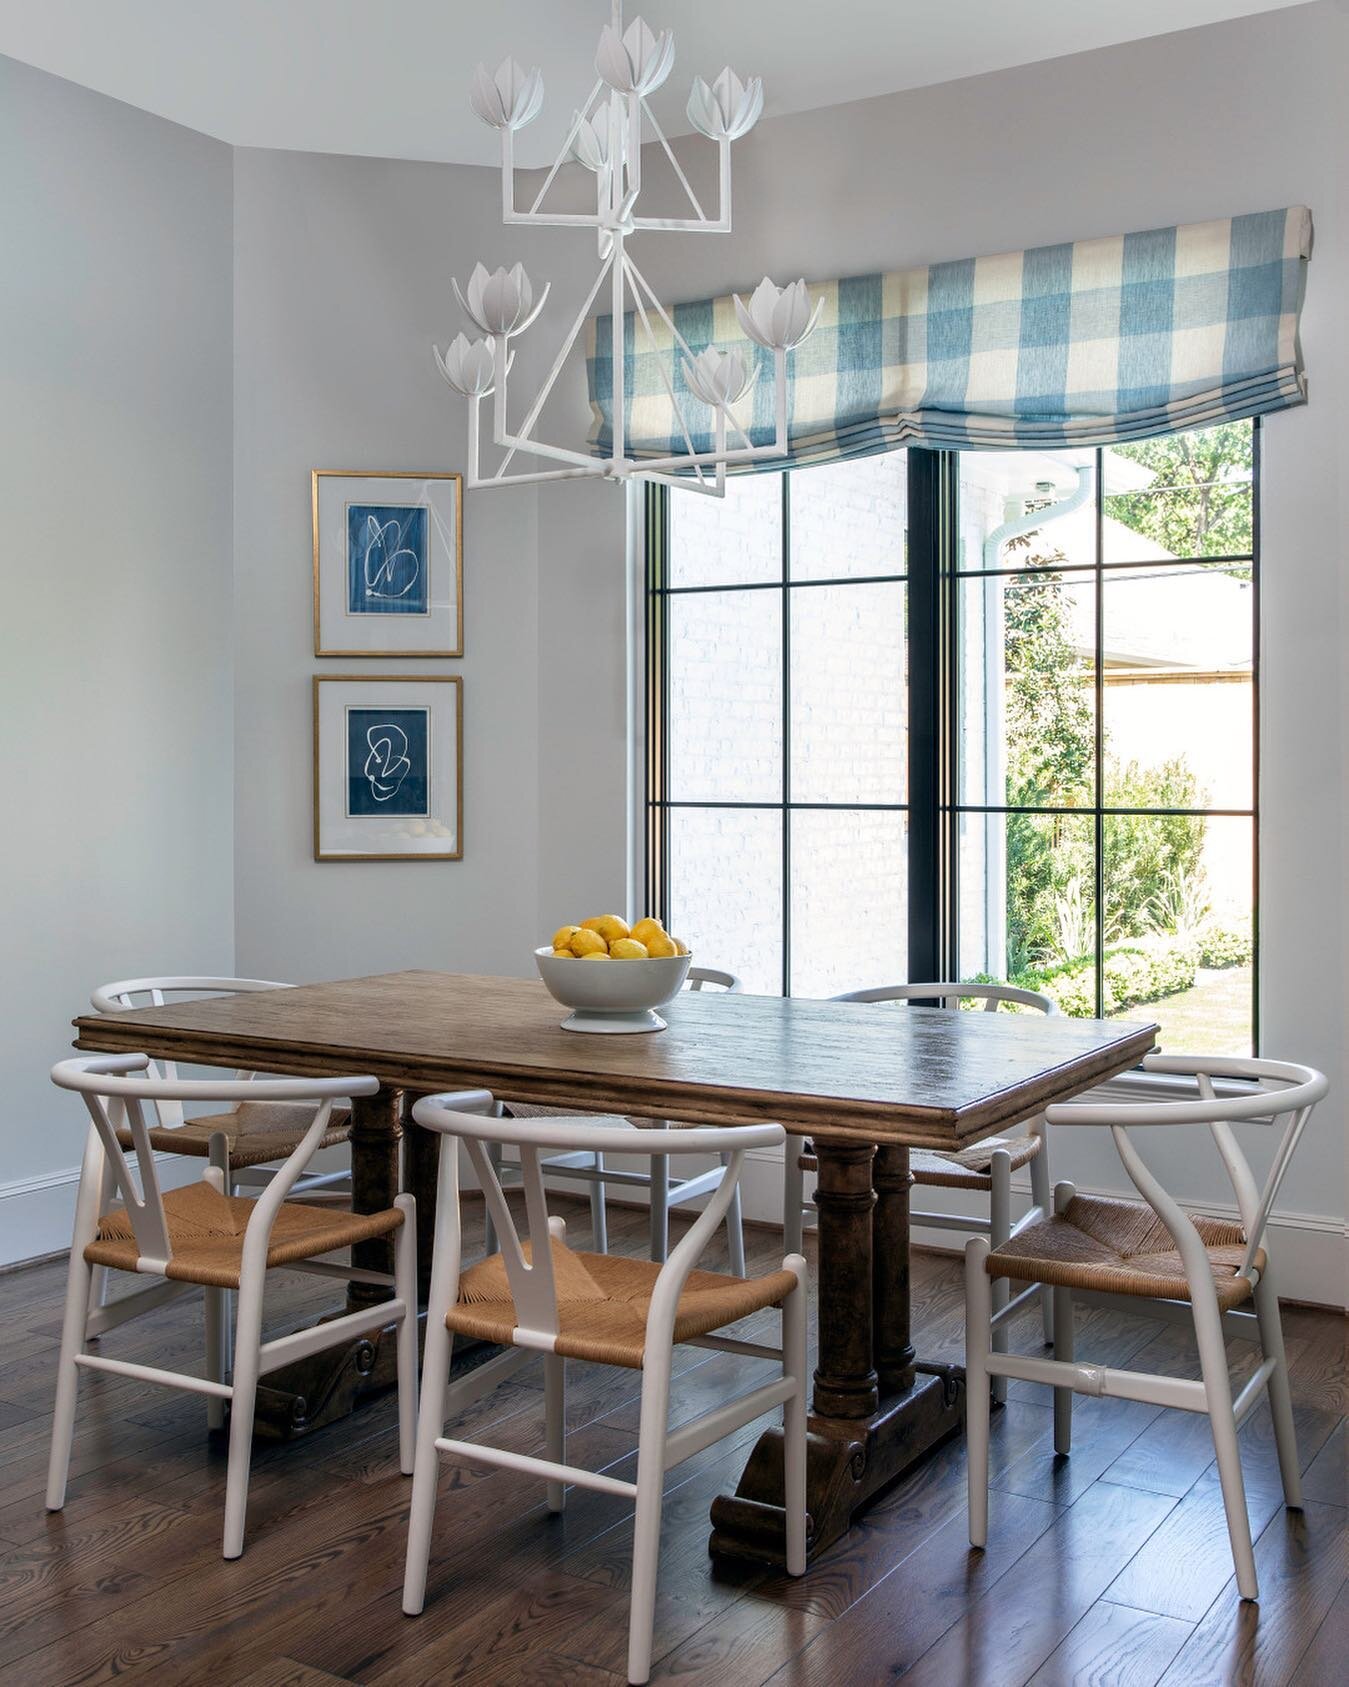 &ldquo;Everything good, everything magical happens between the months of June and August&rdquo; - Jenny Han #hellosummer ☀️☀️☀️ Photo: @kerrykirkphoto styling: @curiousdetails #shannoncraindesign #blueandwhite #breakfastnook #houstondesigner #houston